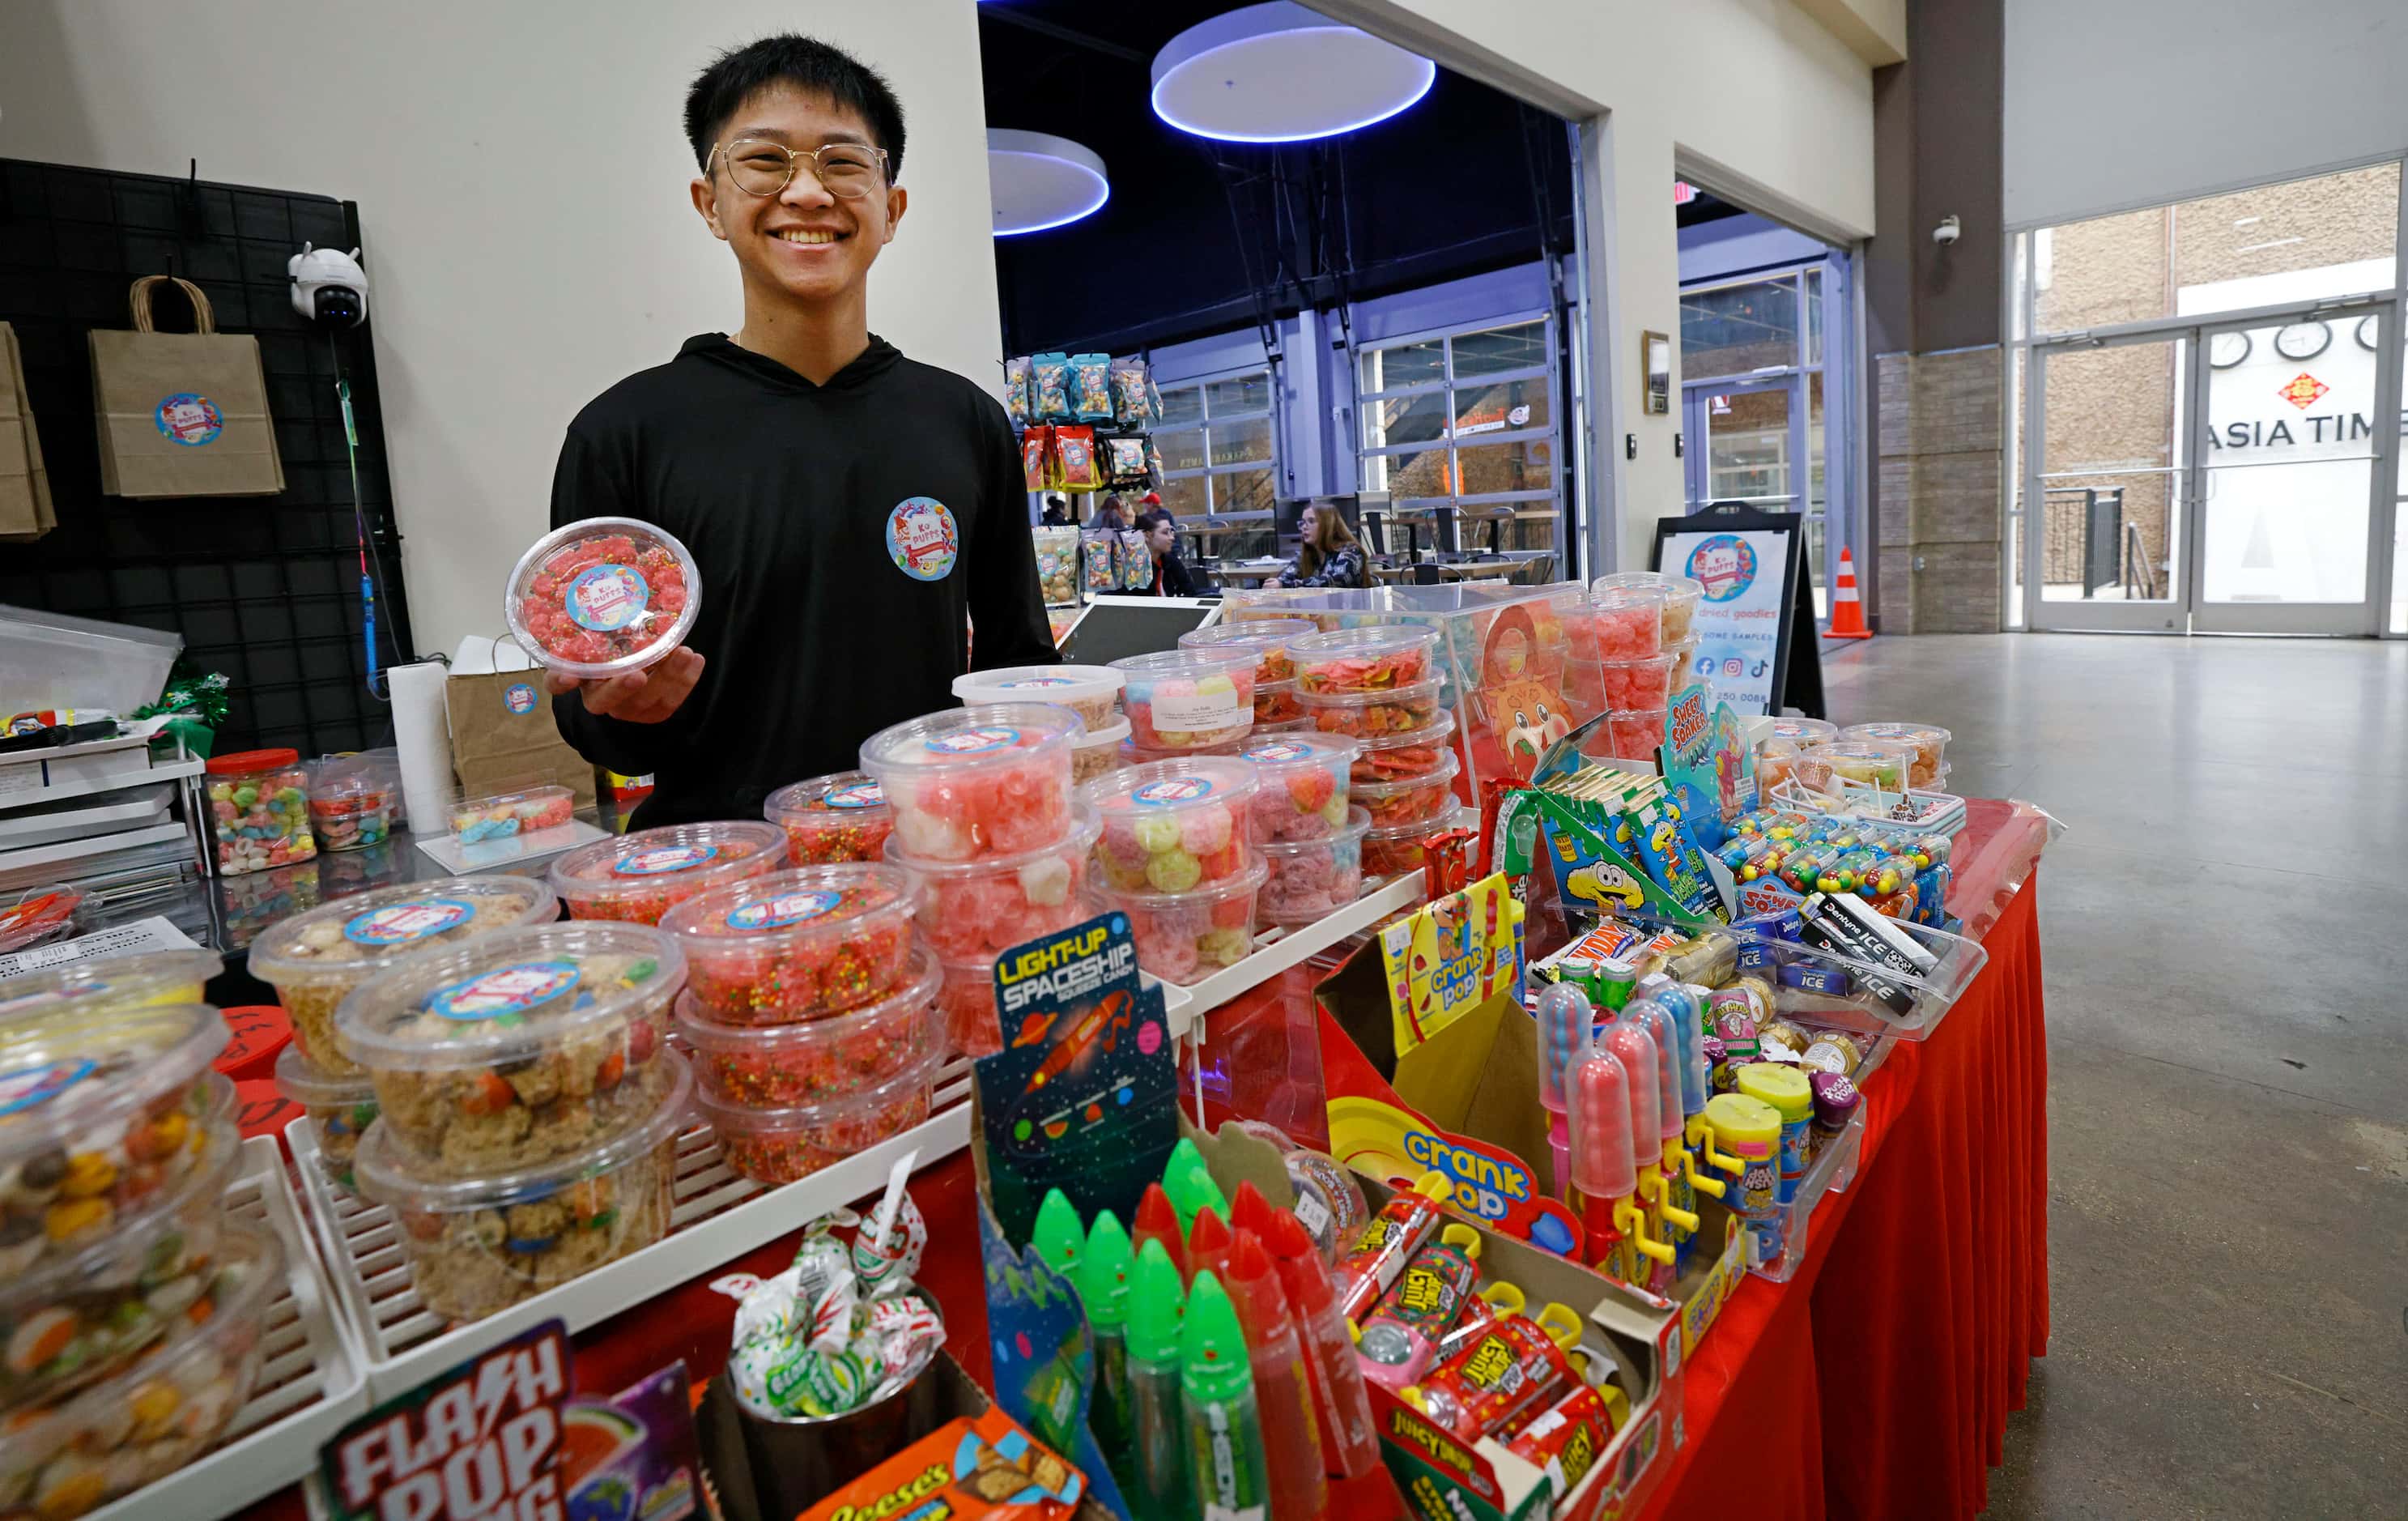 K Puffs Goodies owner Adrick Phan poses for a photo at his shop at Asia Times Square,...